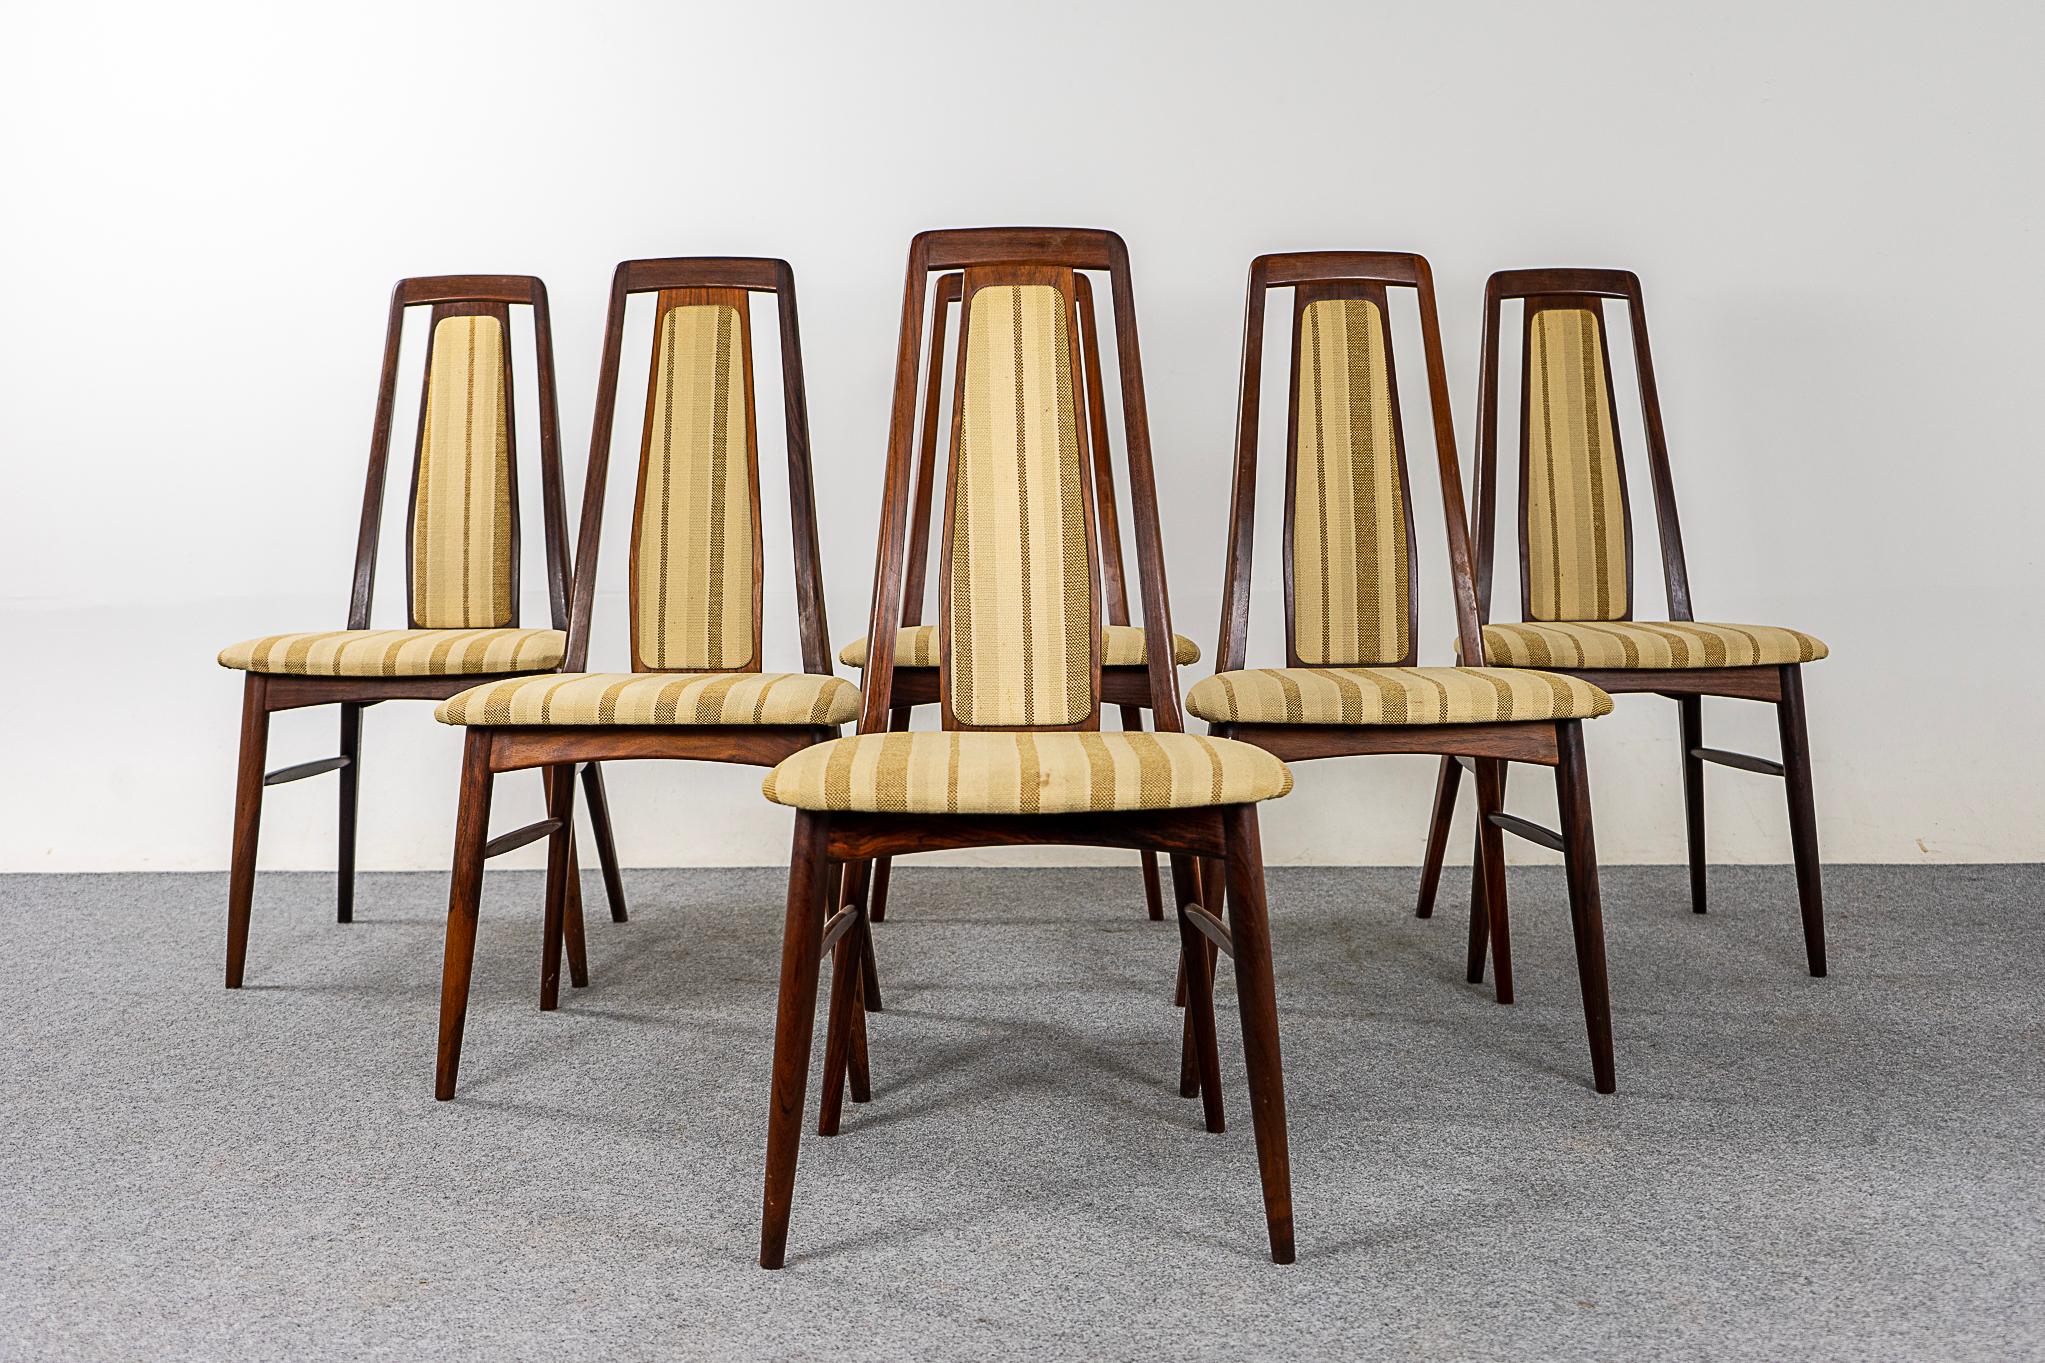 Rosewood Danish modern dining chairs by Niels Koefoed, circa 1960's. Beautifully tapered high back chairs. Solid wood frame with cross braces for stability and support. Original condition with signs of use and age, minor staining on